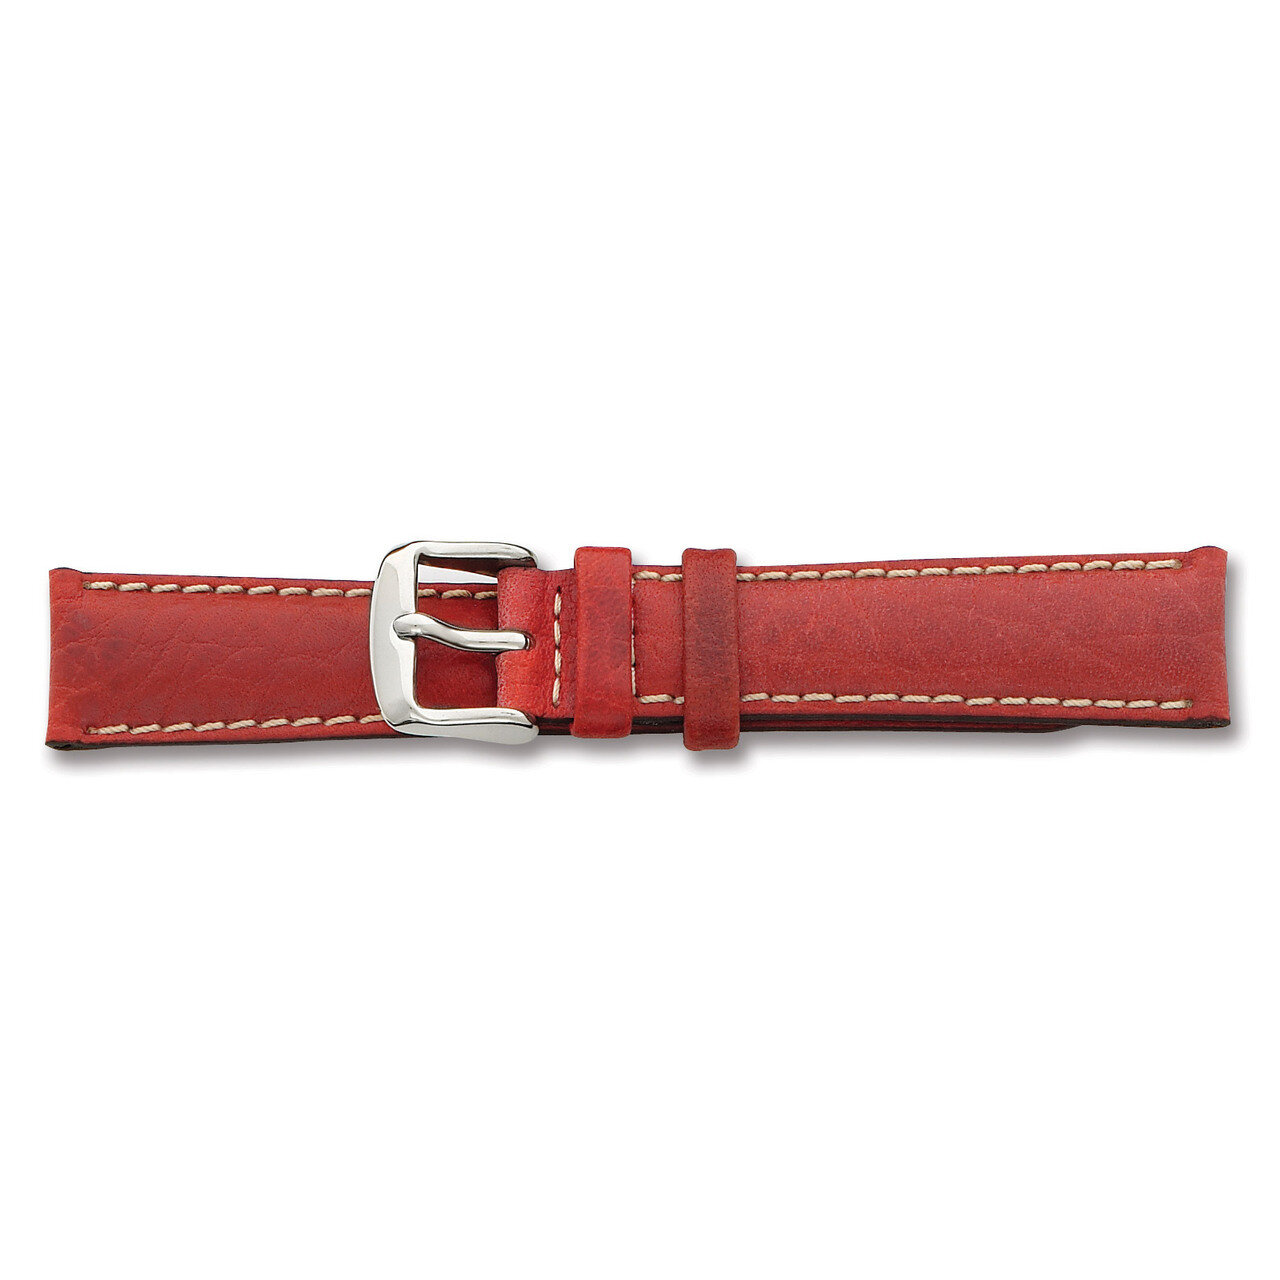 22mm Red Sport Leather White Stitch Watch Band 7.5 Inch Silver-tone Buckle BA138-22